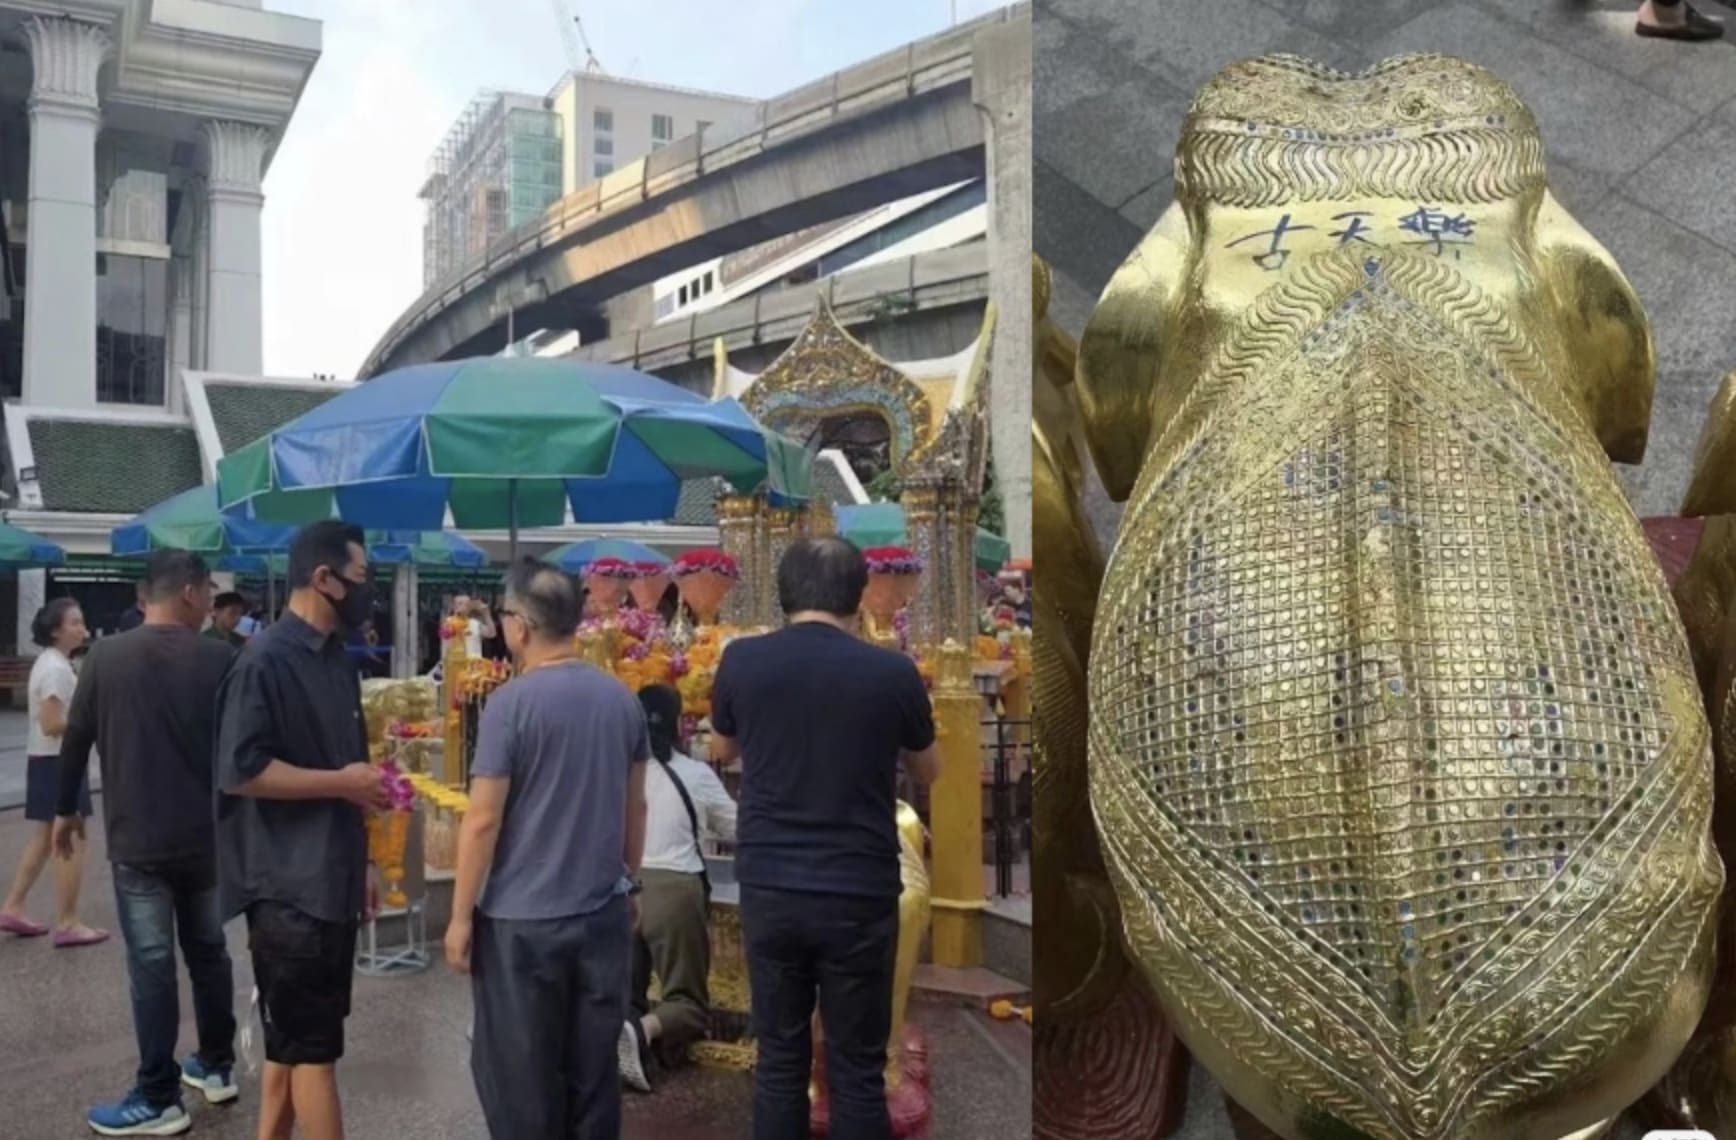 Louis Koo Spends S$9K On 4 Gold Elephant Statues As Offerings To Four-Faced Buddha In Bangkok